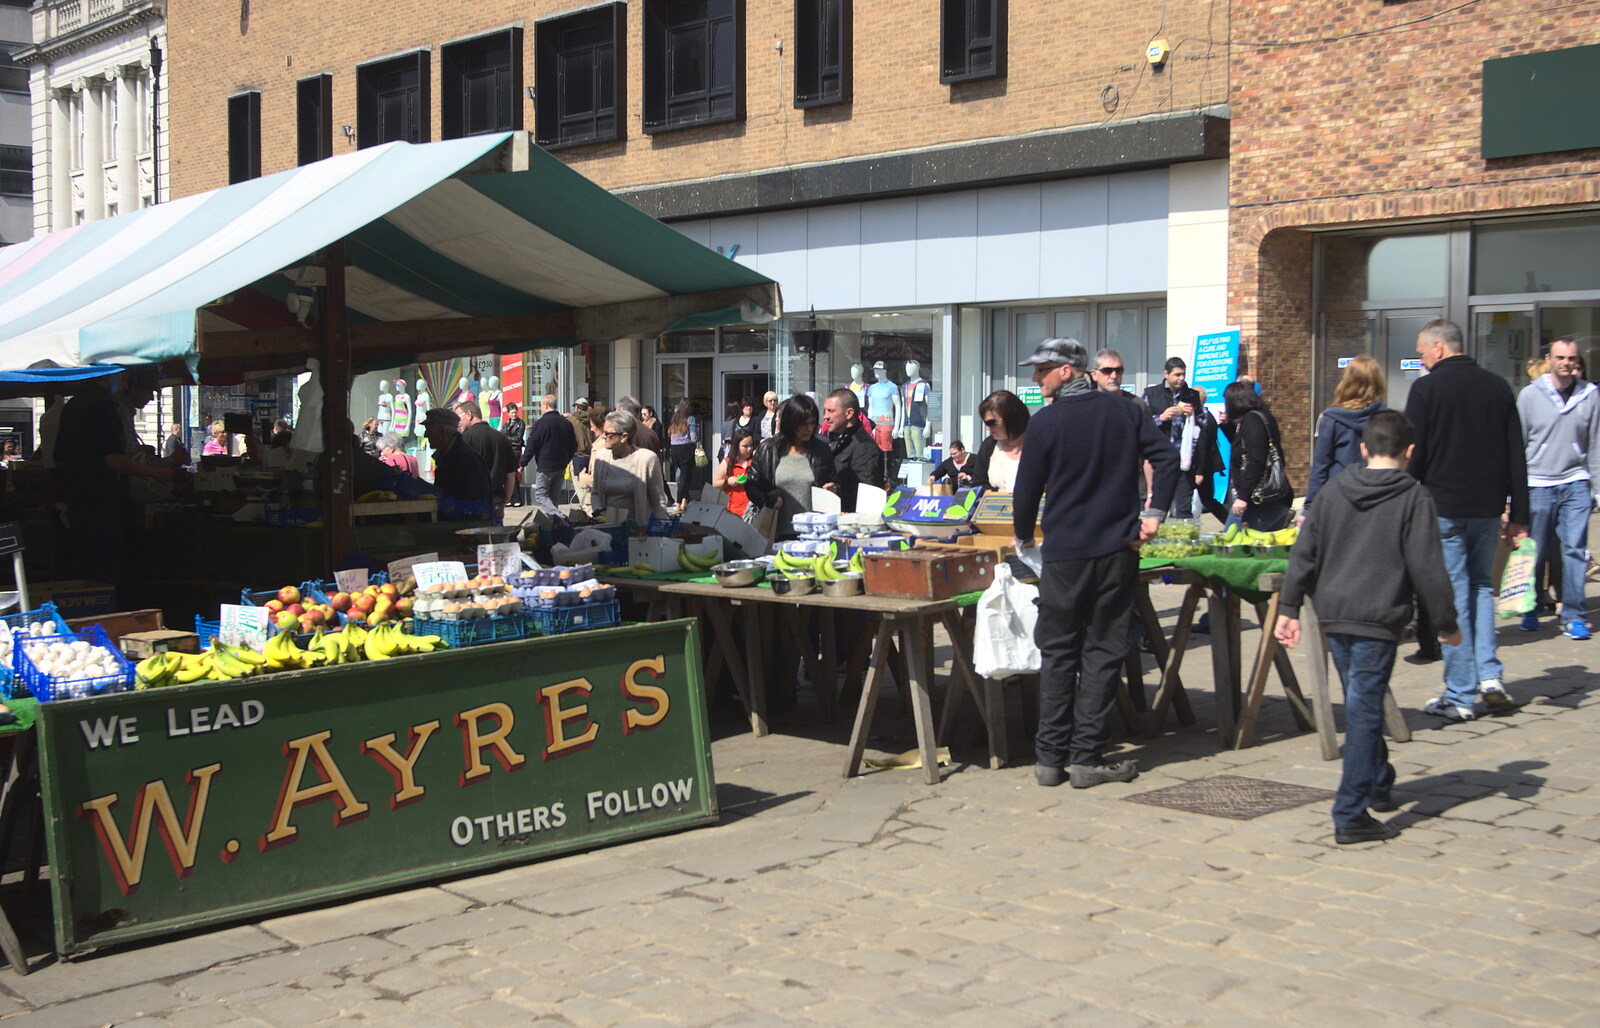 An outdoor market from Chesterfield and the Twisty Spire, Derbyshire - 19th April 2013